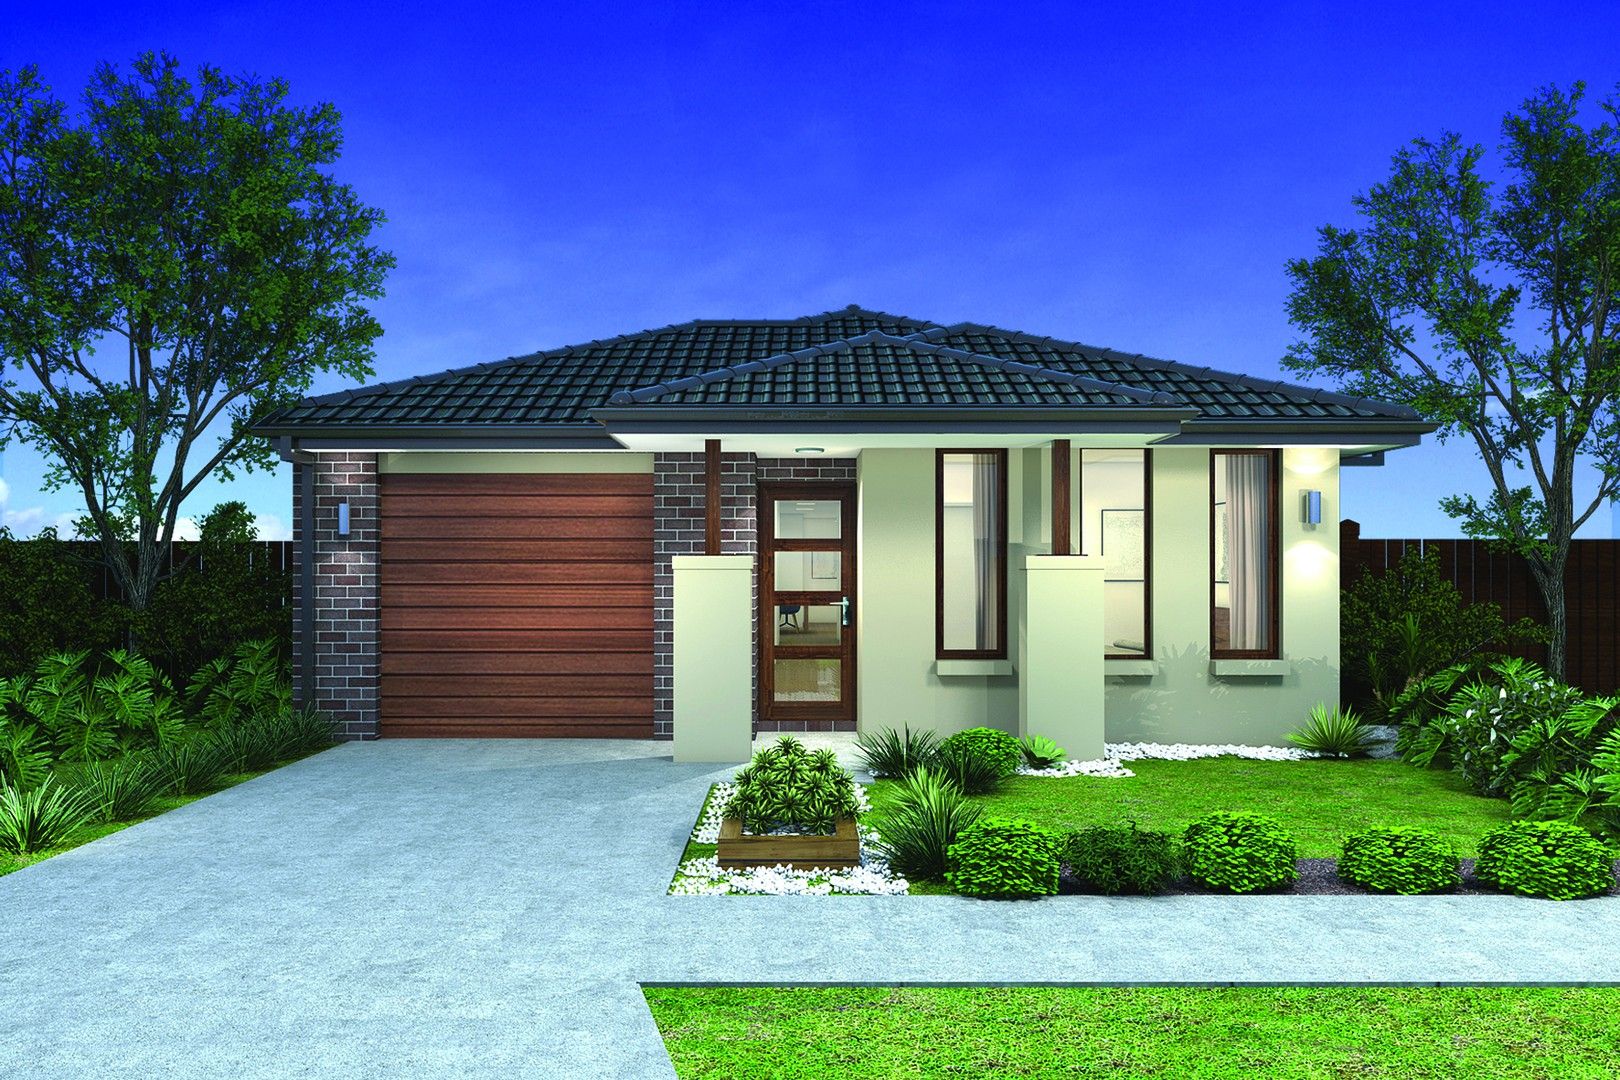 3 bedrooms New House & Land in LOT 646 Taylors Run Estate FRASER RISE VIC, 3336